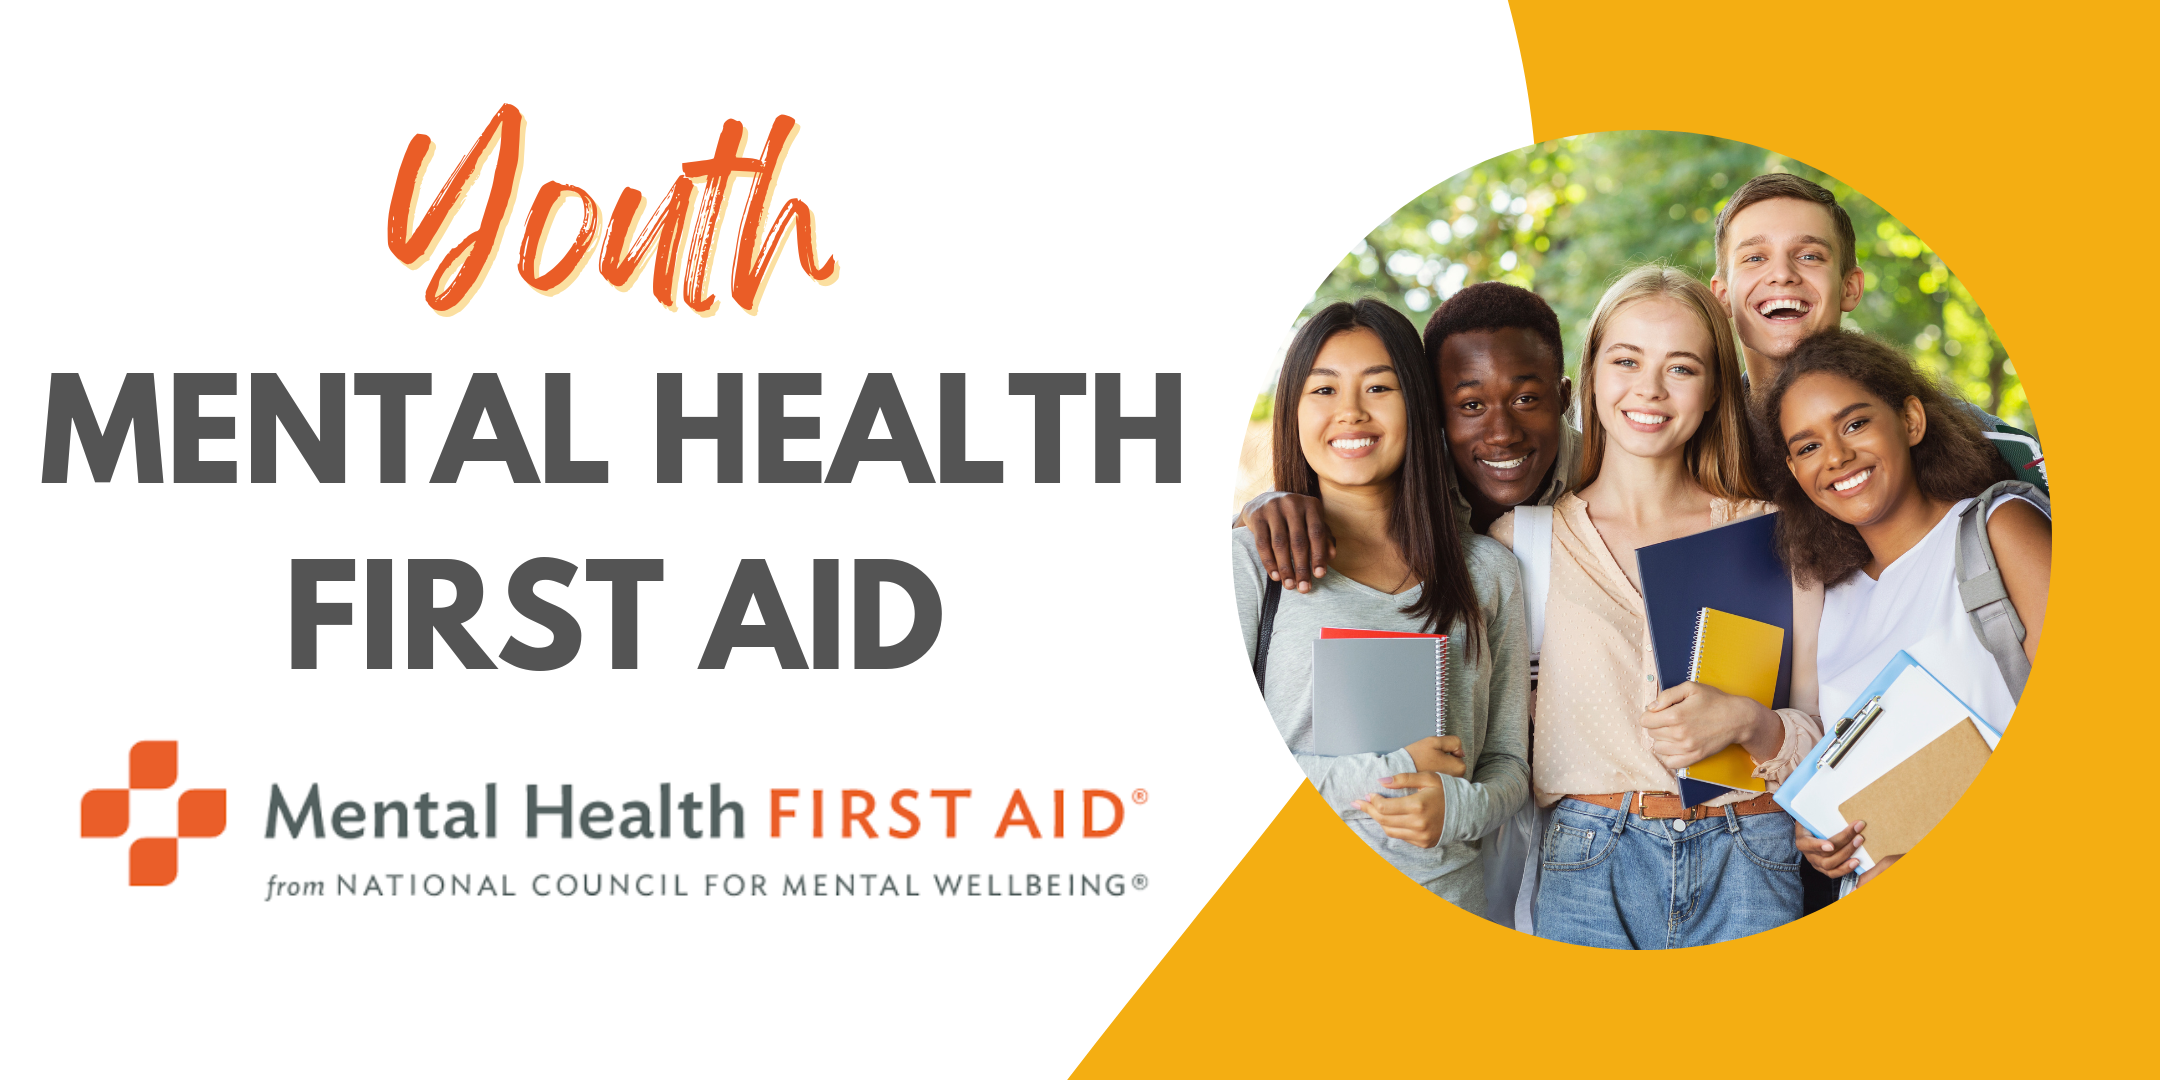 Mental Health First Aid: Your Guide to Crisis Support